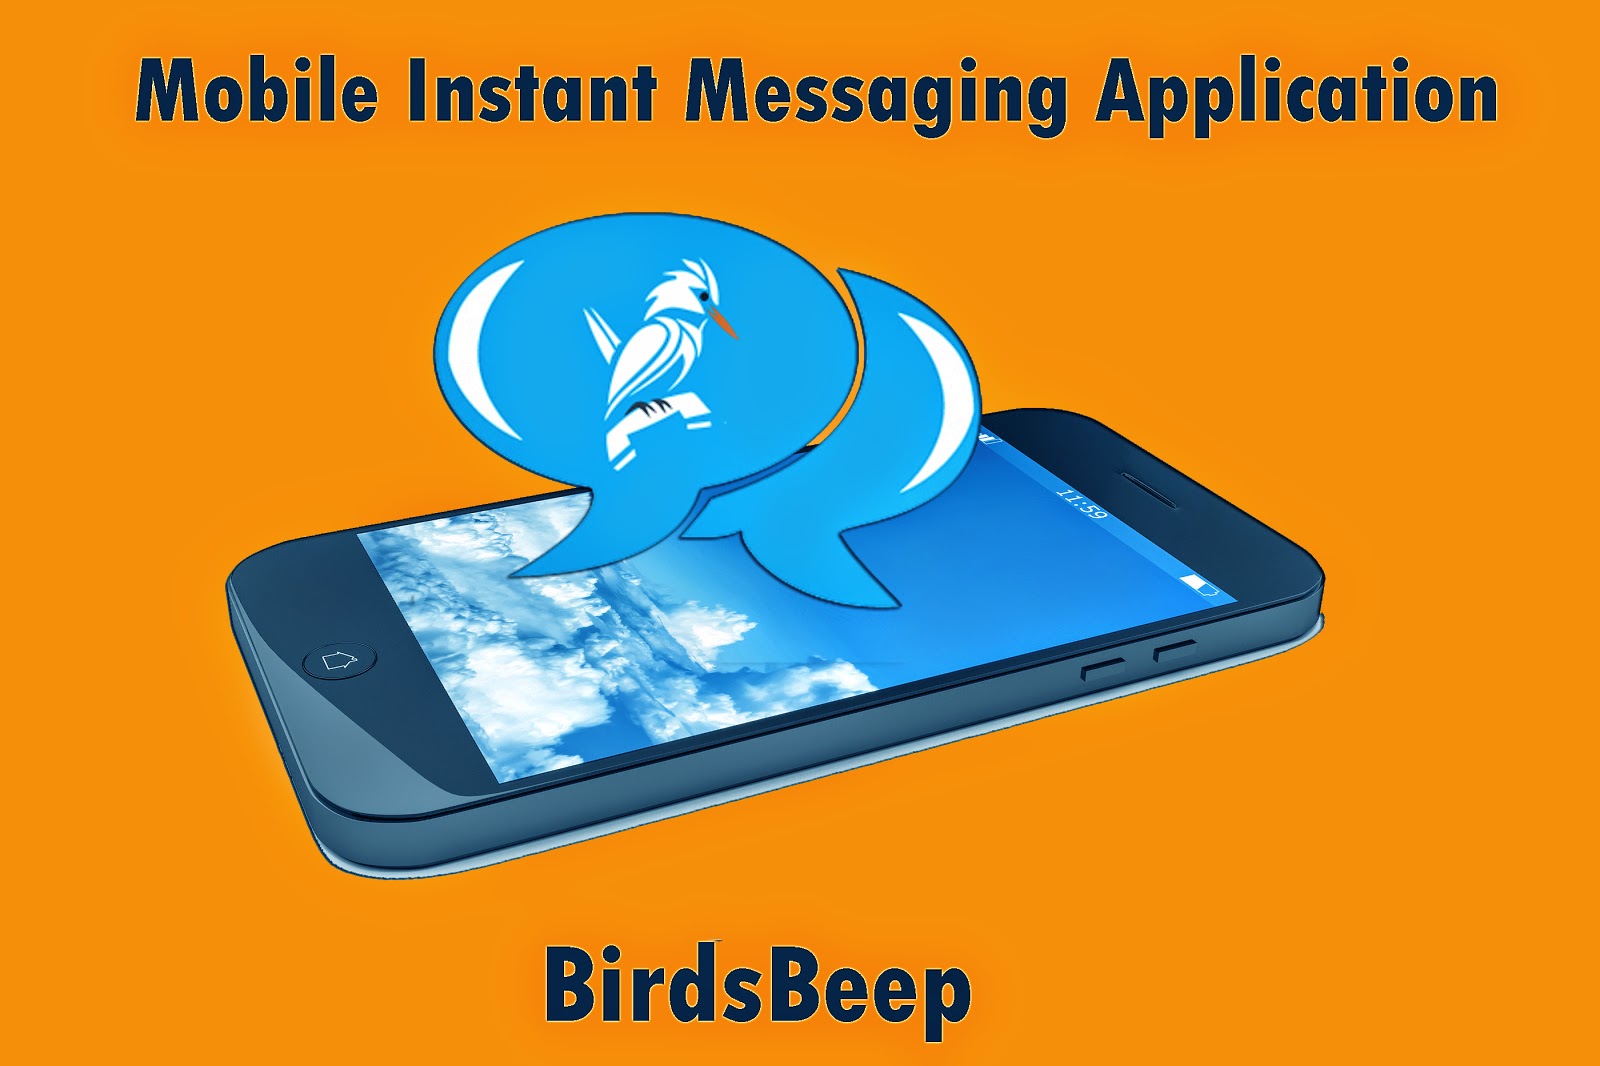 Mobile Instant Messaging Applications